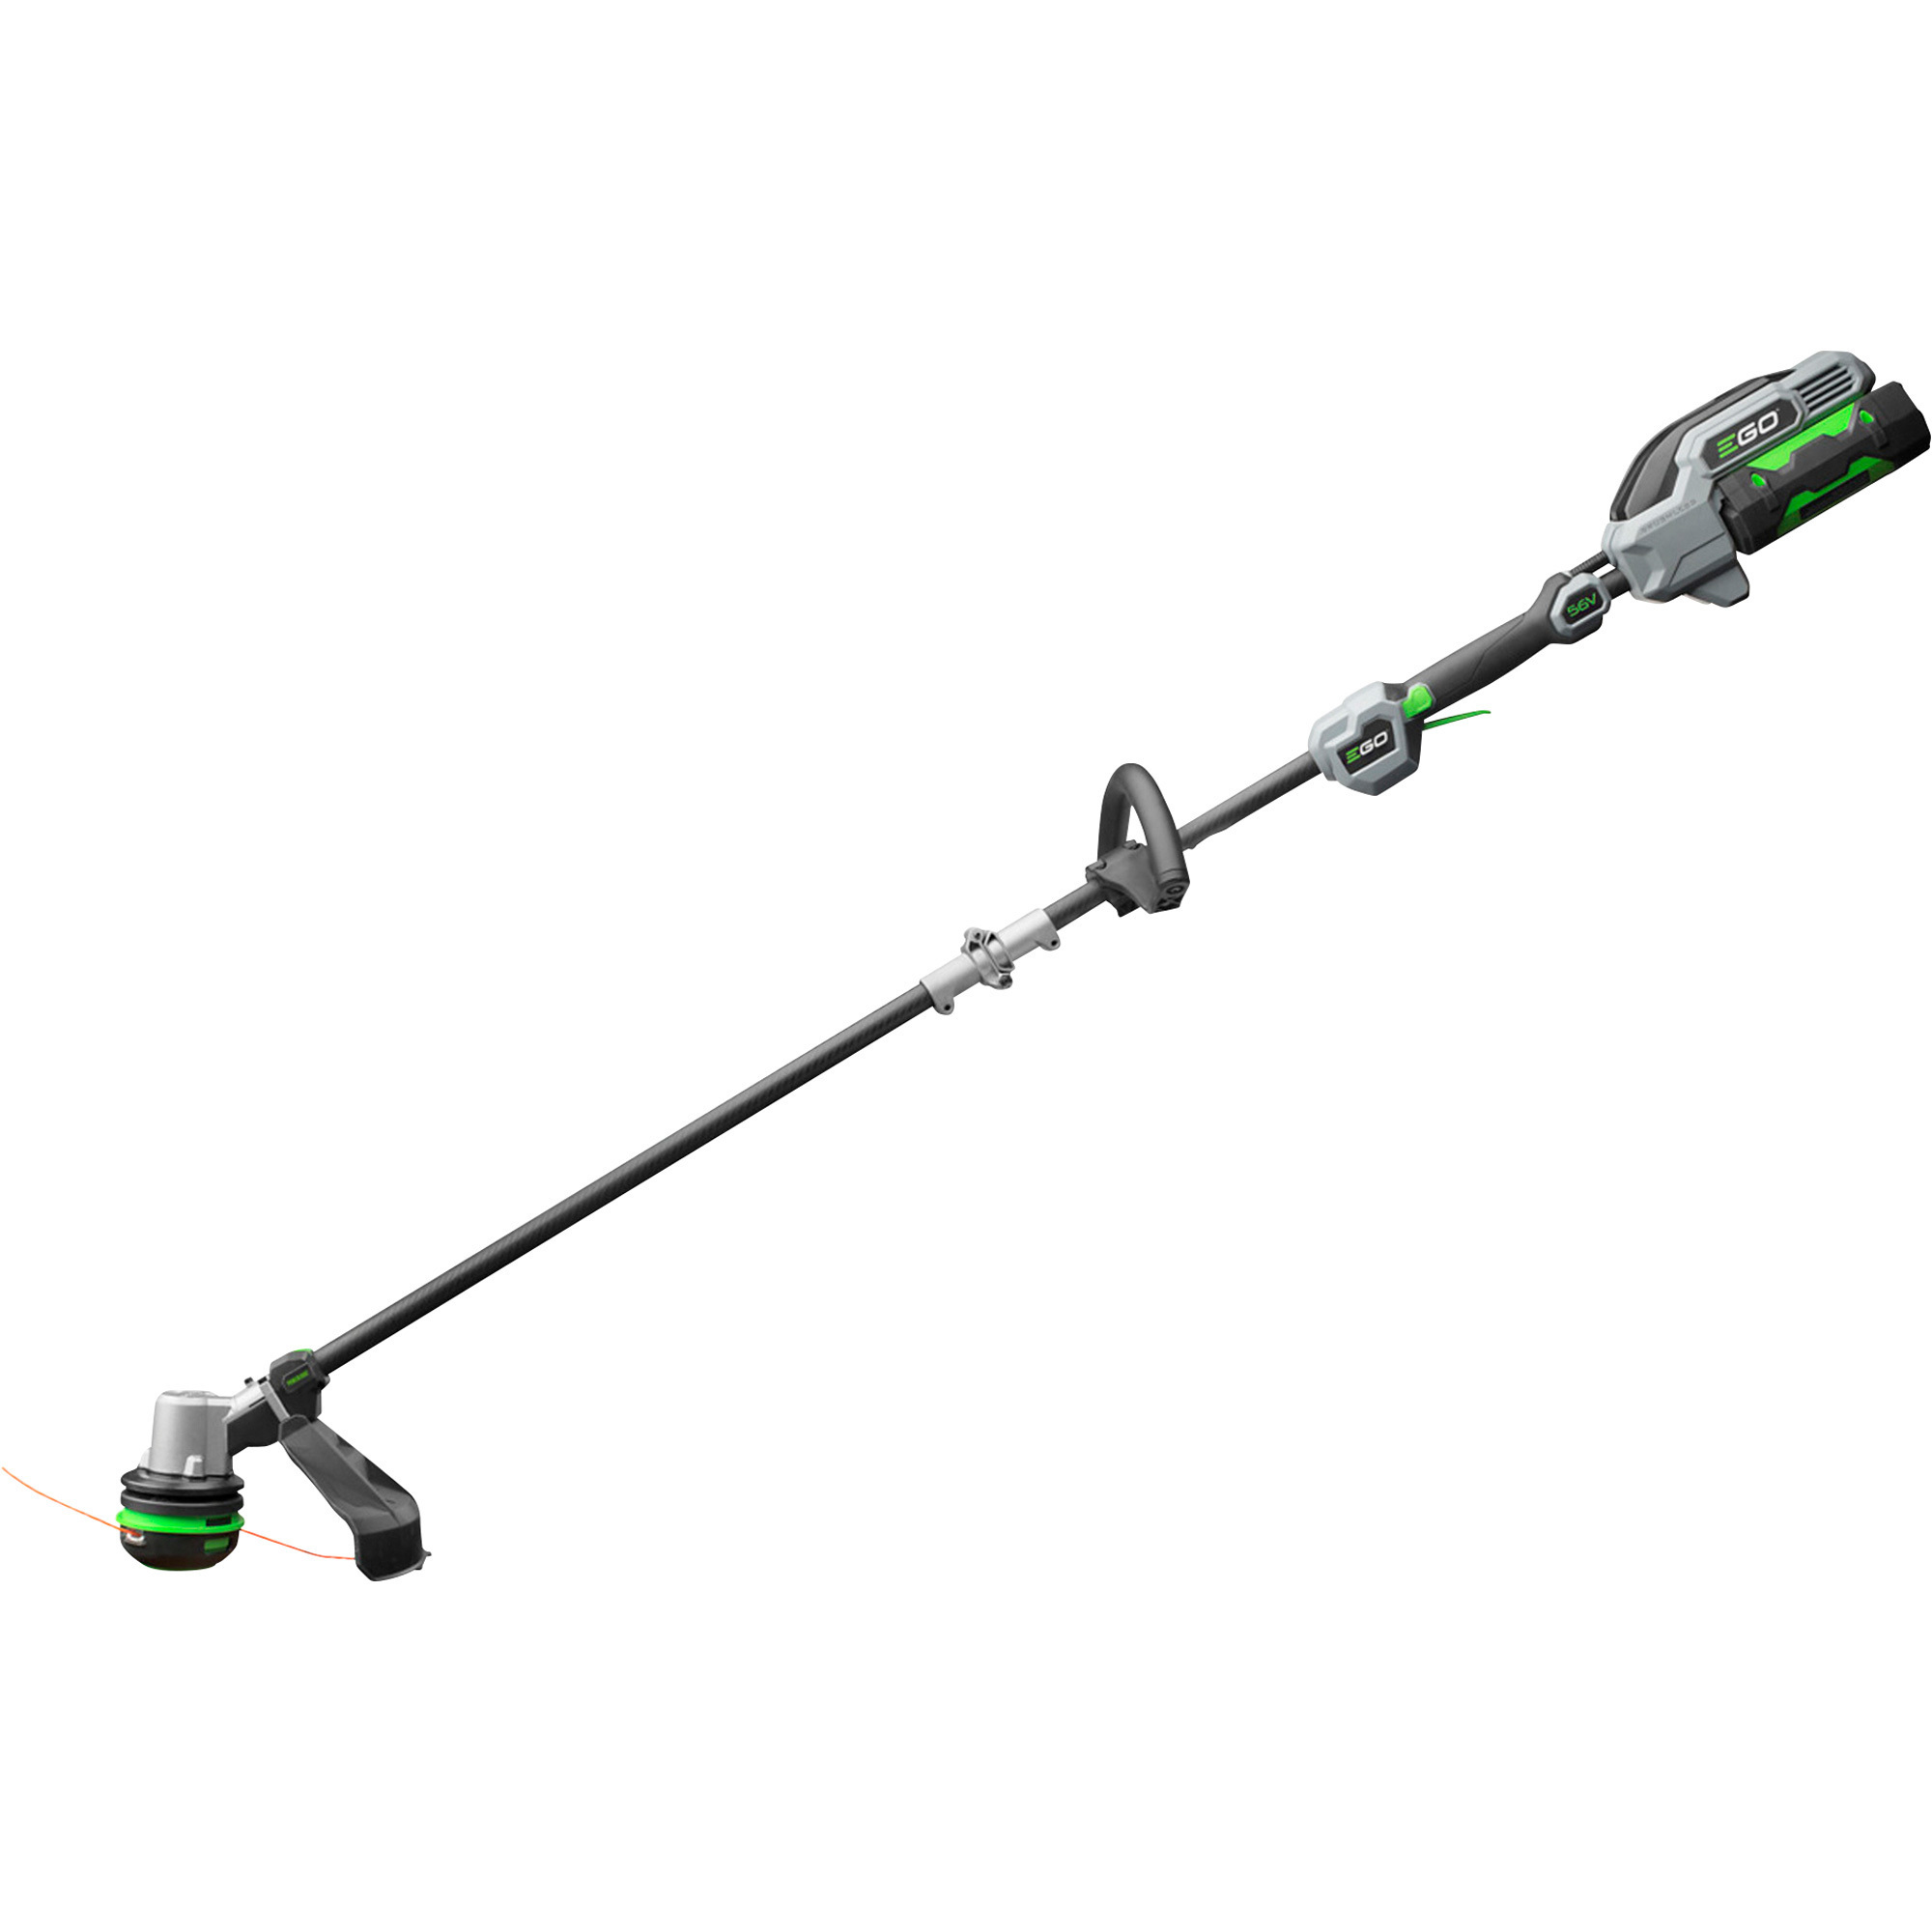 EGO 56V ARC Lithium String Trimmer with POWERLOAD Technology and Carbon Fiber Shaft, 15Inch Cutting Width, 2.5 Ah, Model ST1521S